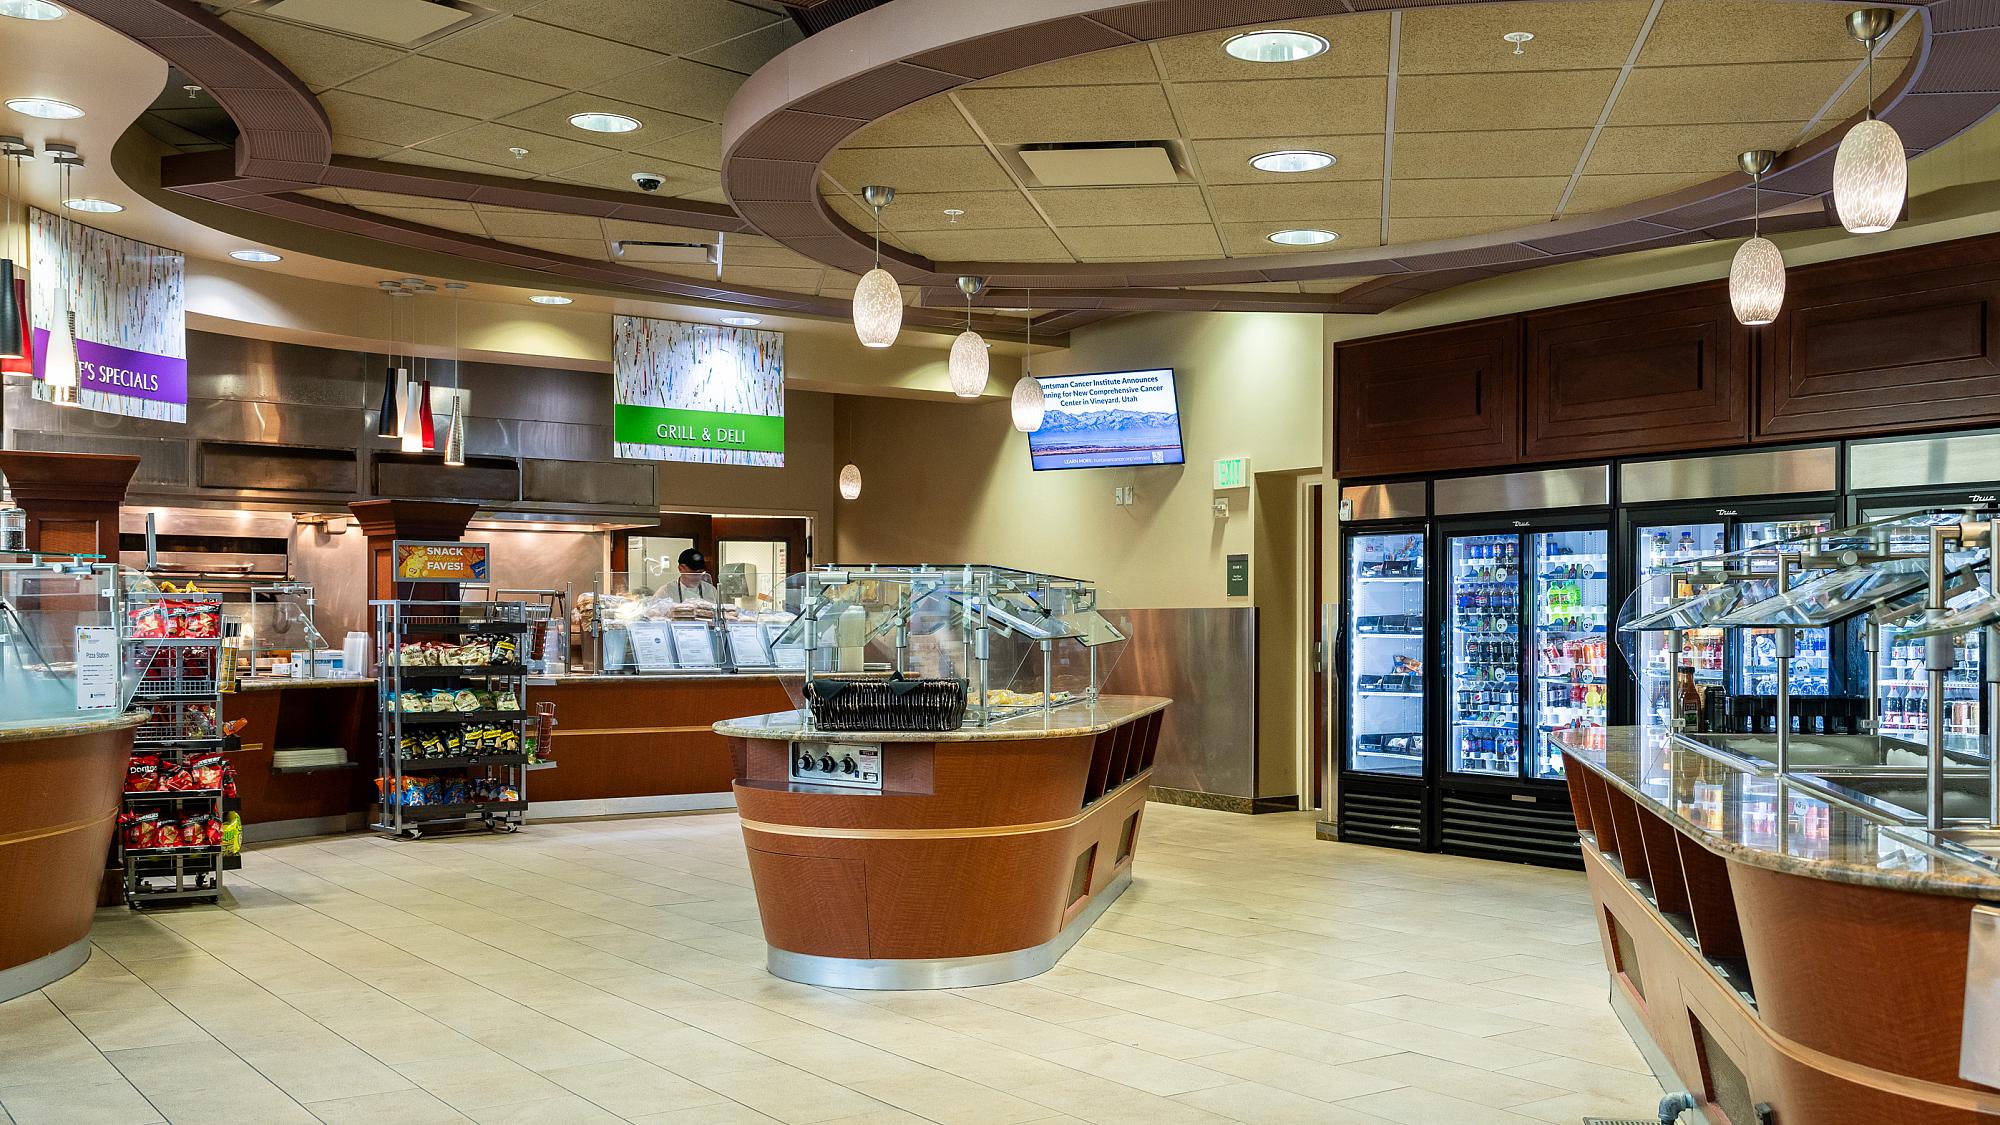 Buffet islands, refrigerators with grab and go food, and food ordering stations in The Bistro